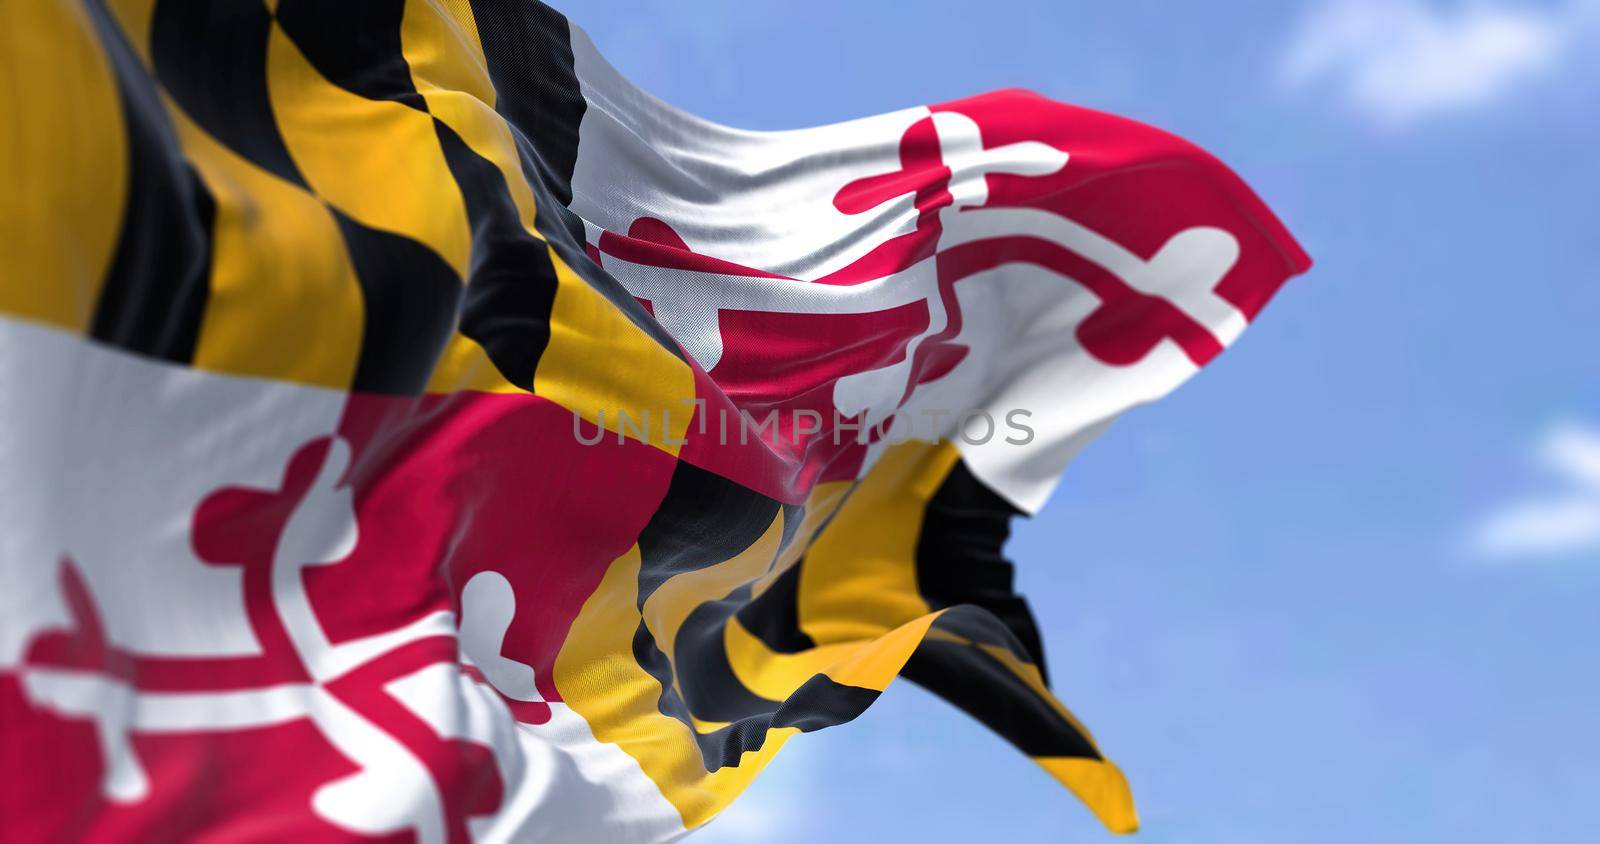 The US state flag of Maryland waving in the wind by rarrarorro